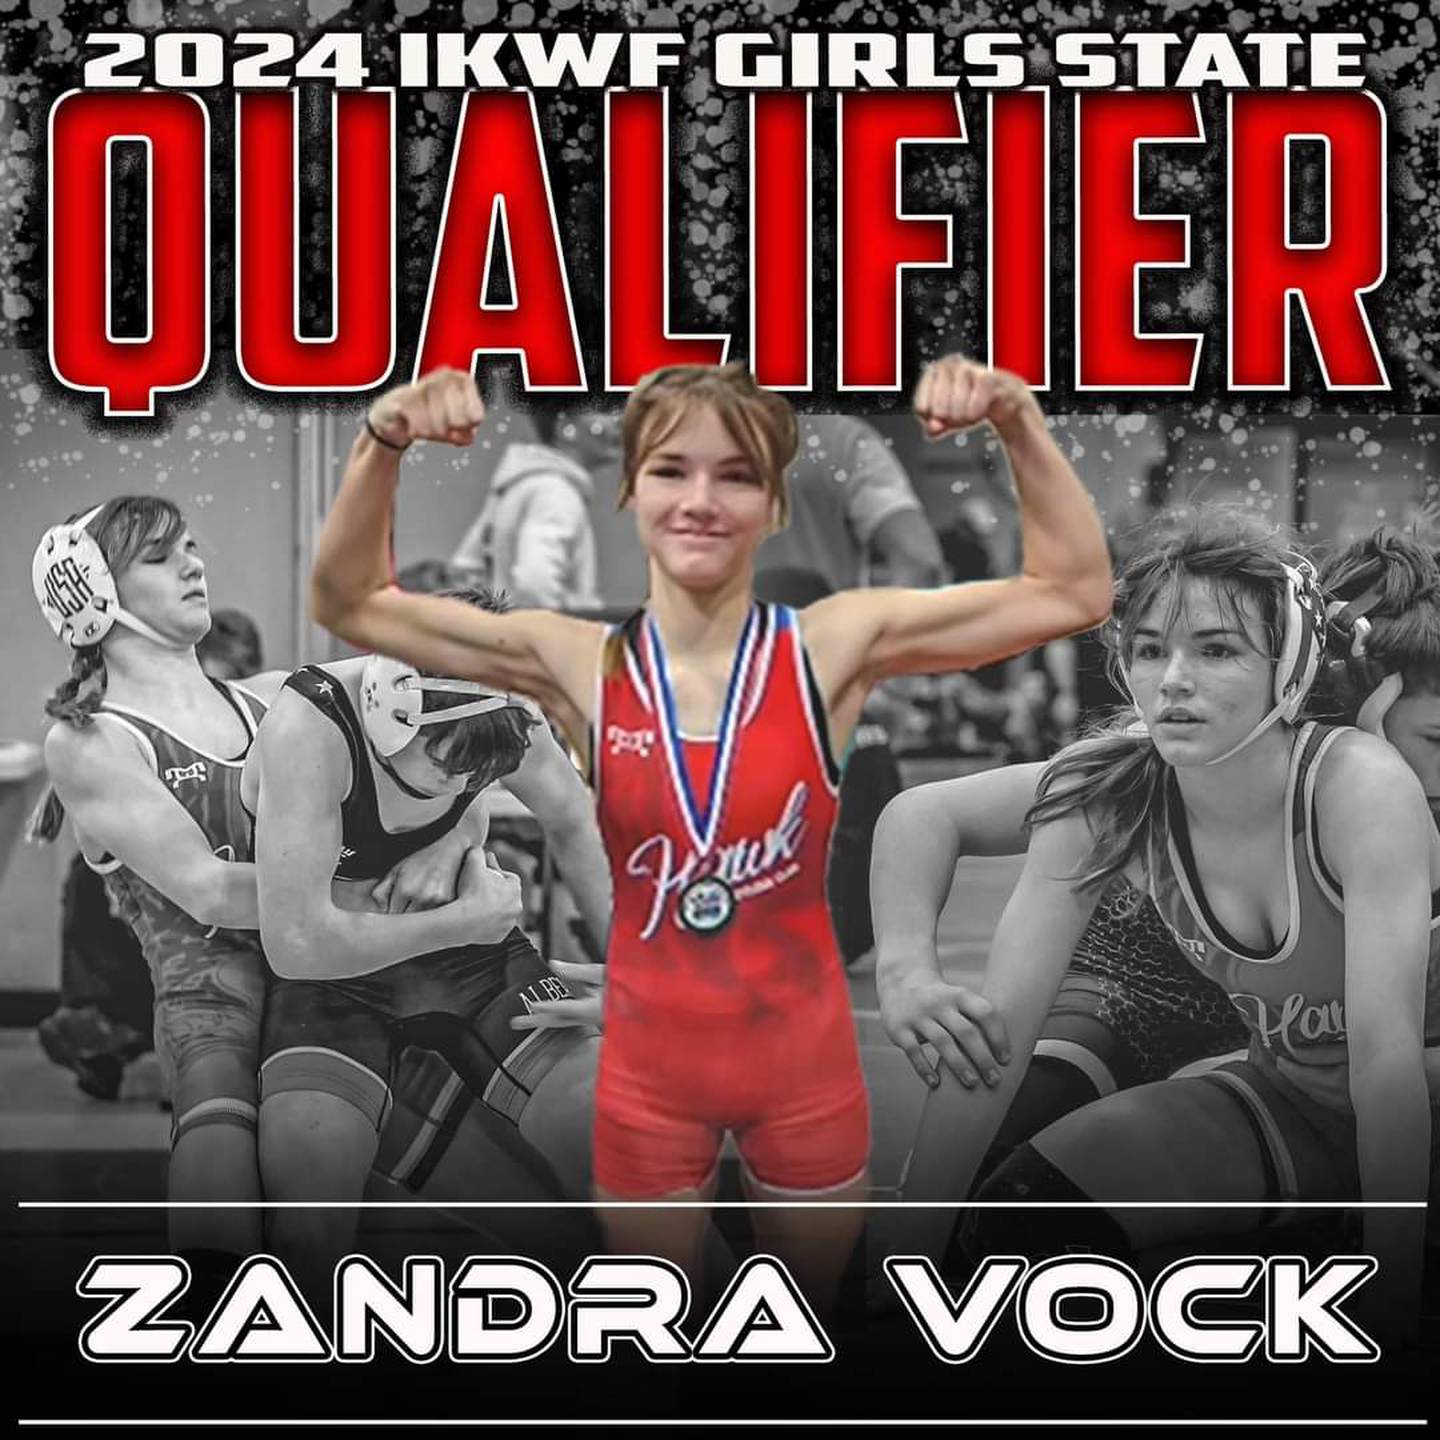 Aplington Middle School eighth grader and Polo resident Zandra Vock placed sixth at 115 pounds at the first IKWF State Girls Wrestling Tournament at the BMO Center in Rockford. The tournament was held March 9-10.